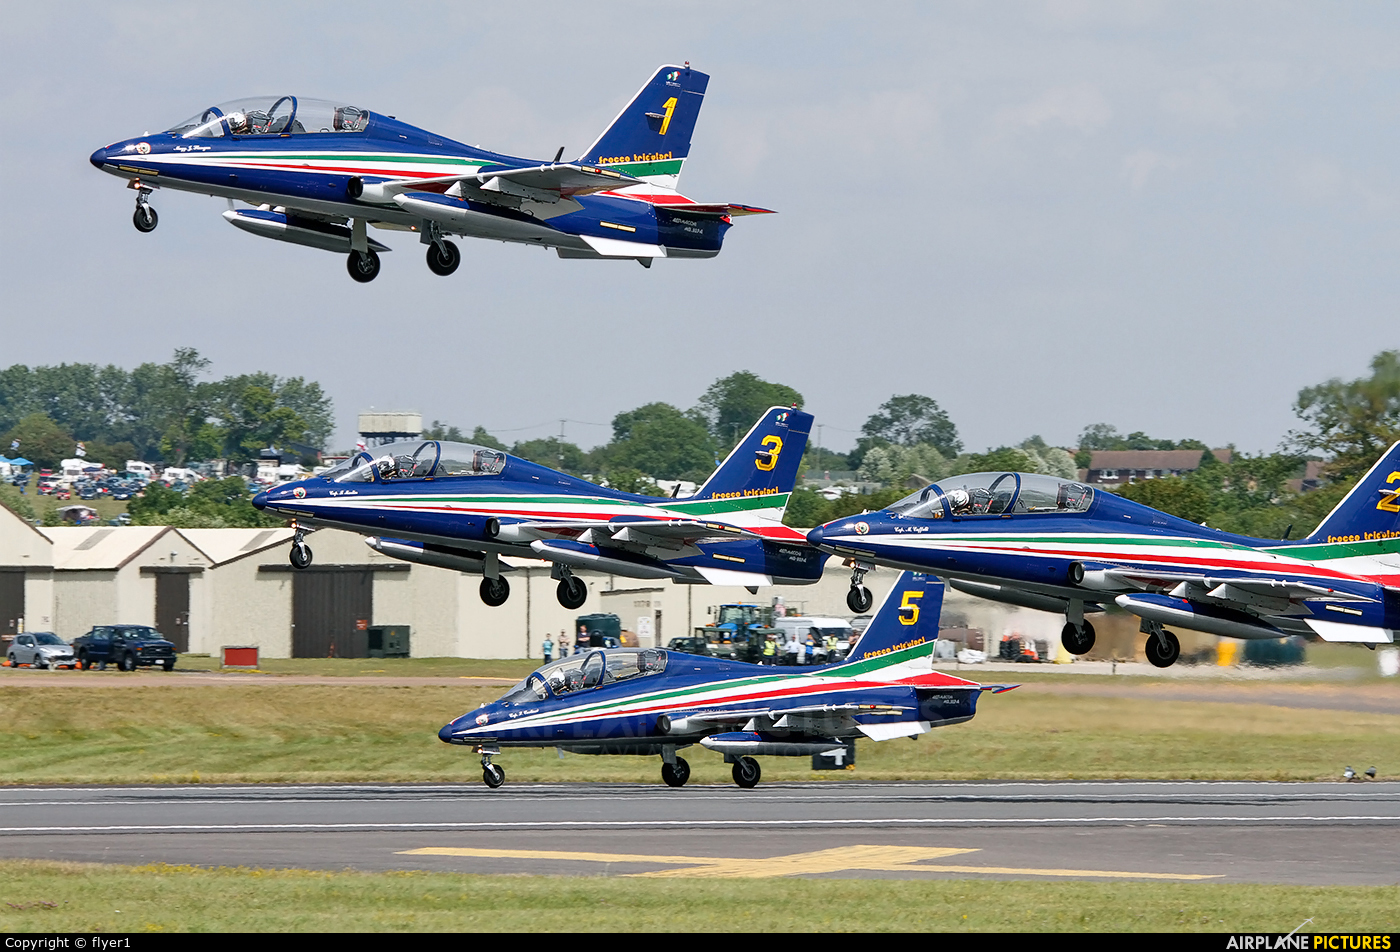 Italy - Air Force "Frecce Tricolori" MM54500 aircraft at Fairford